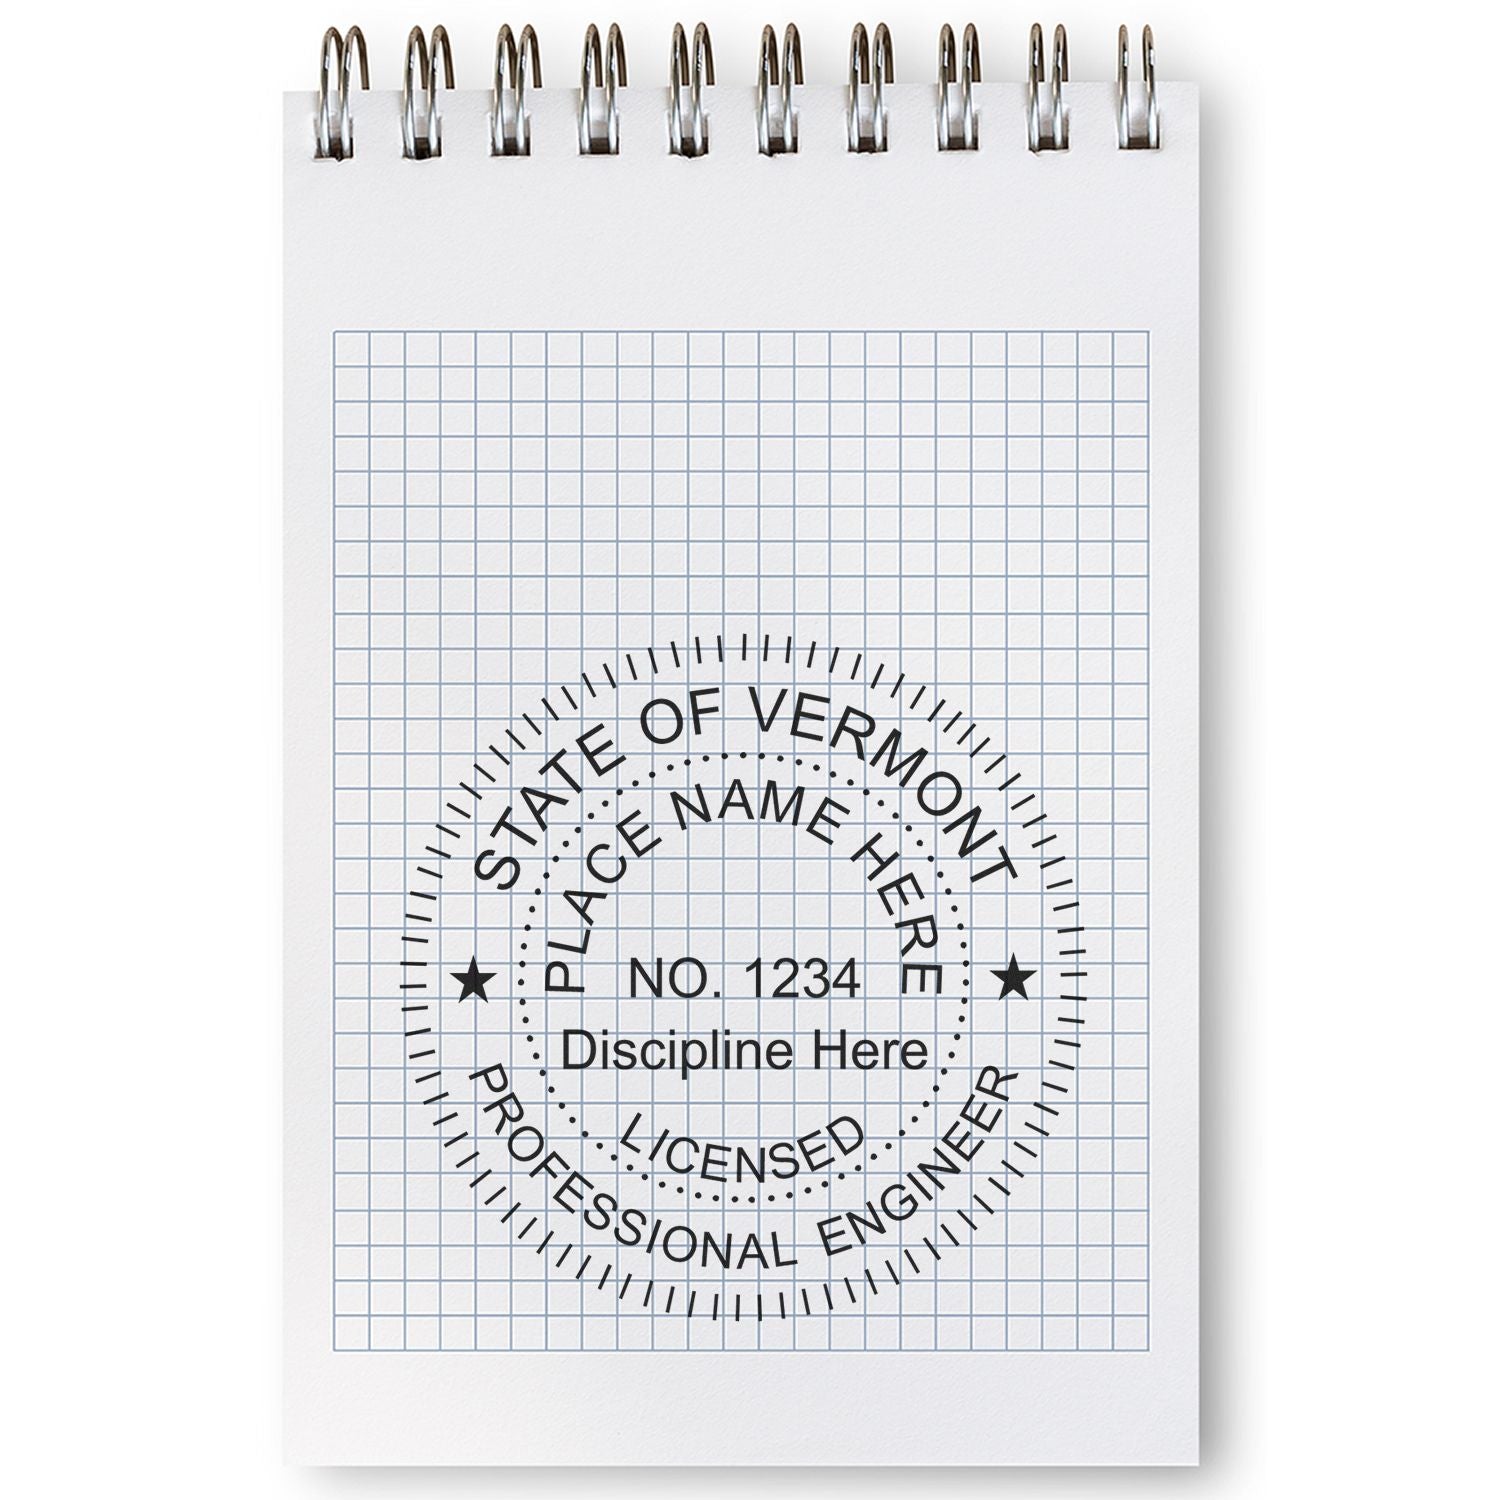 A lifestyle photo showing a stamped image of the Digital Vermont PE Stamp and Electronic Seal for Vermont Engineer on a piece of paper